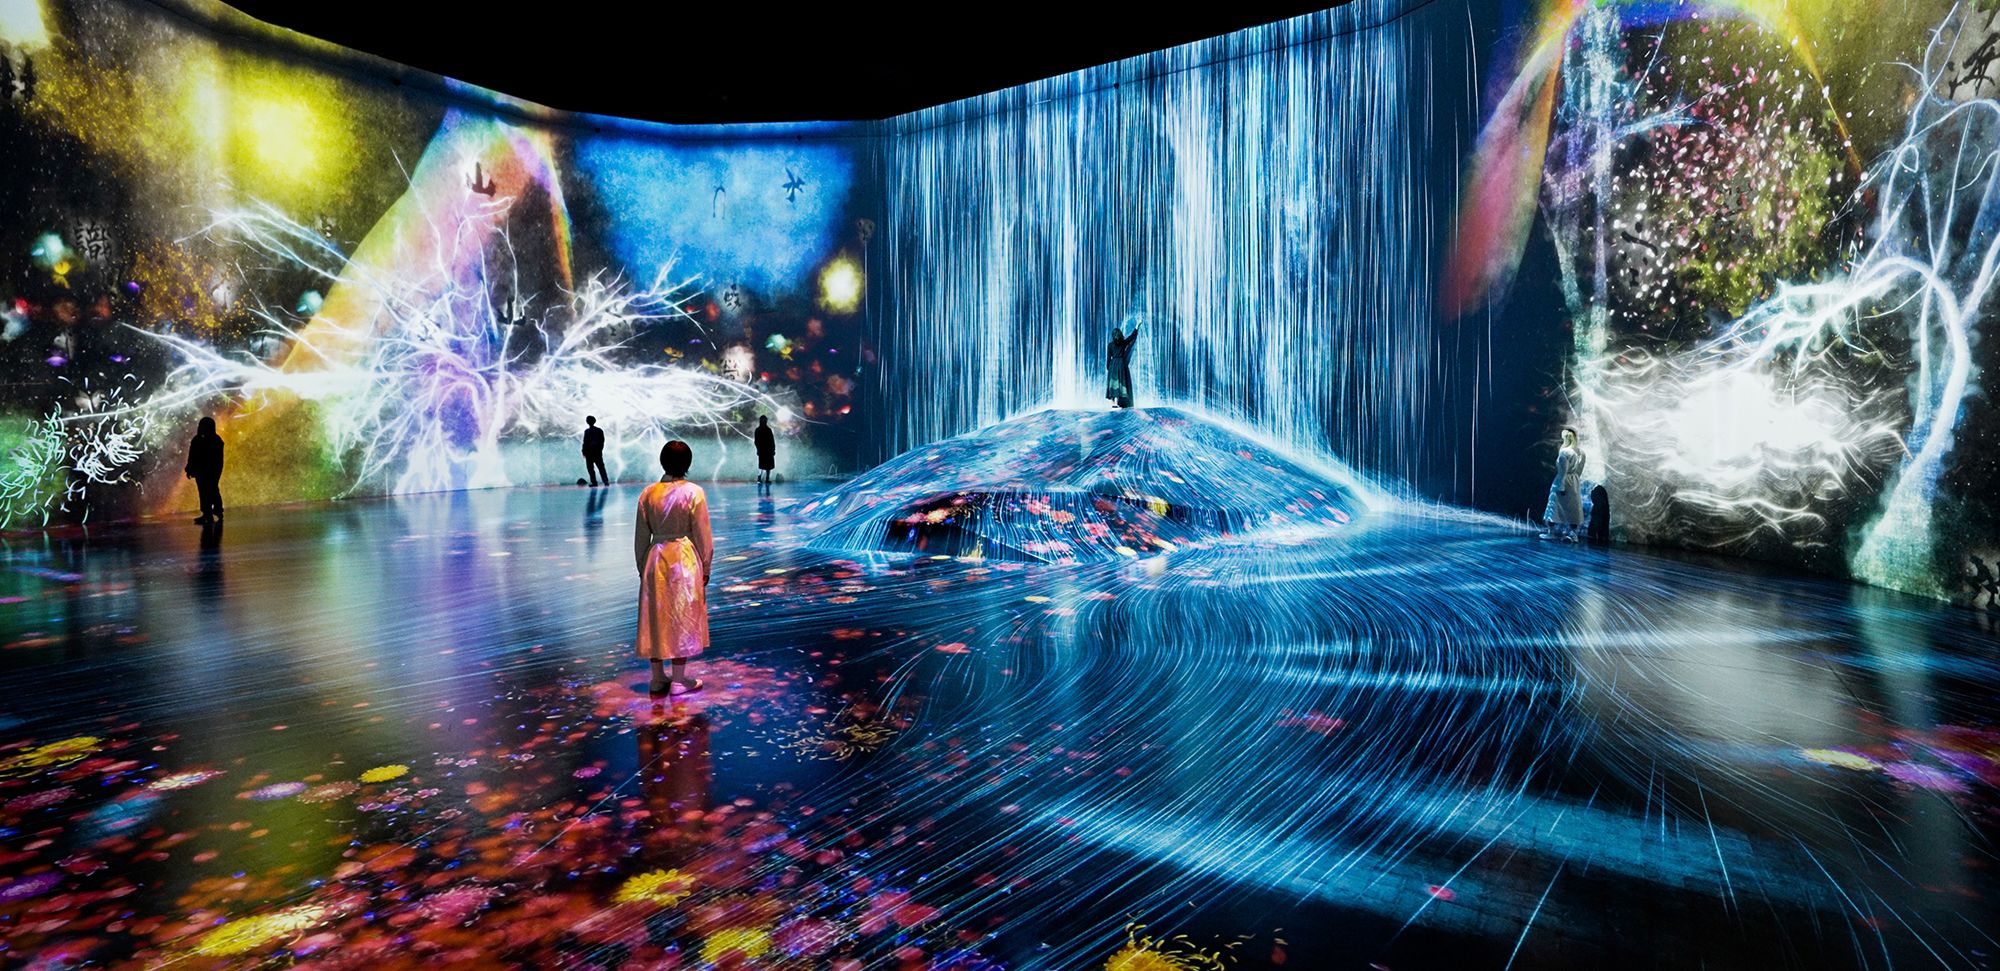 A work entitled "What a Loving, and Beautiful World" appears to move and spread through the room at teamLab's new museum space.